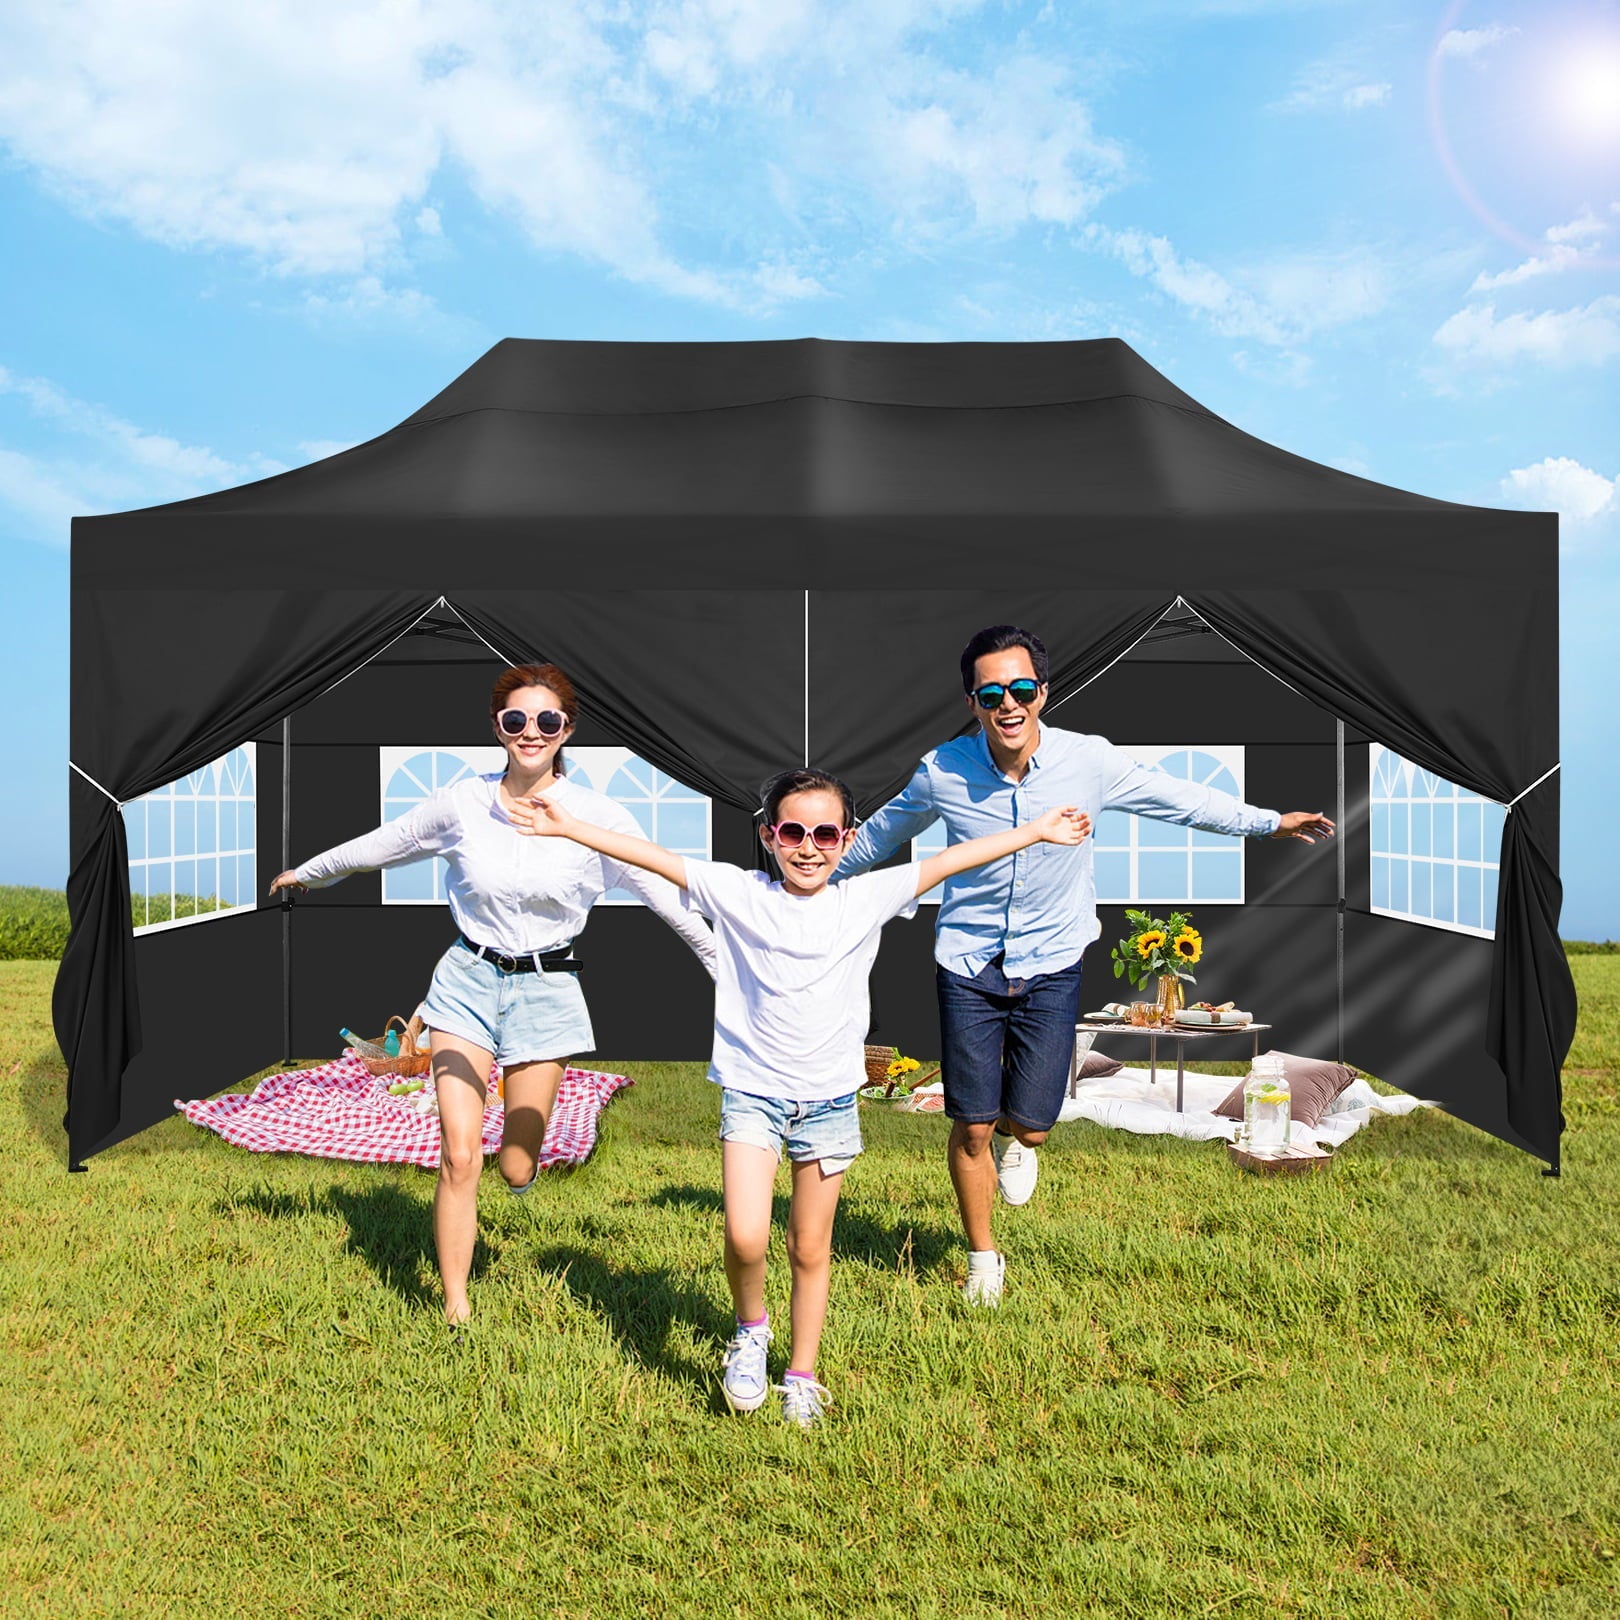 10'x20' Canopy EZ Pop Up Canopy Anti-UV Waterproof Outdoor Tent Portable Party Commercial Instant Canopy Shelter Height Adjustable Tent Gazebo with 6 Removable Sidewalls, 6 Sandbags, Roller Bag, Black